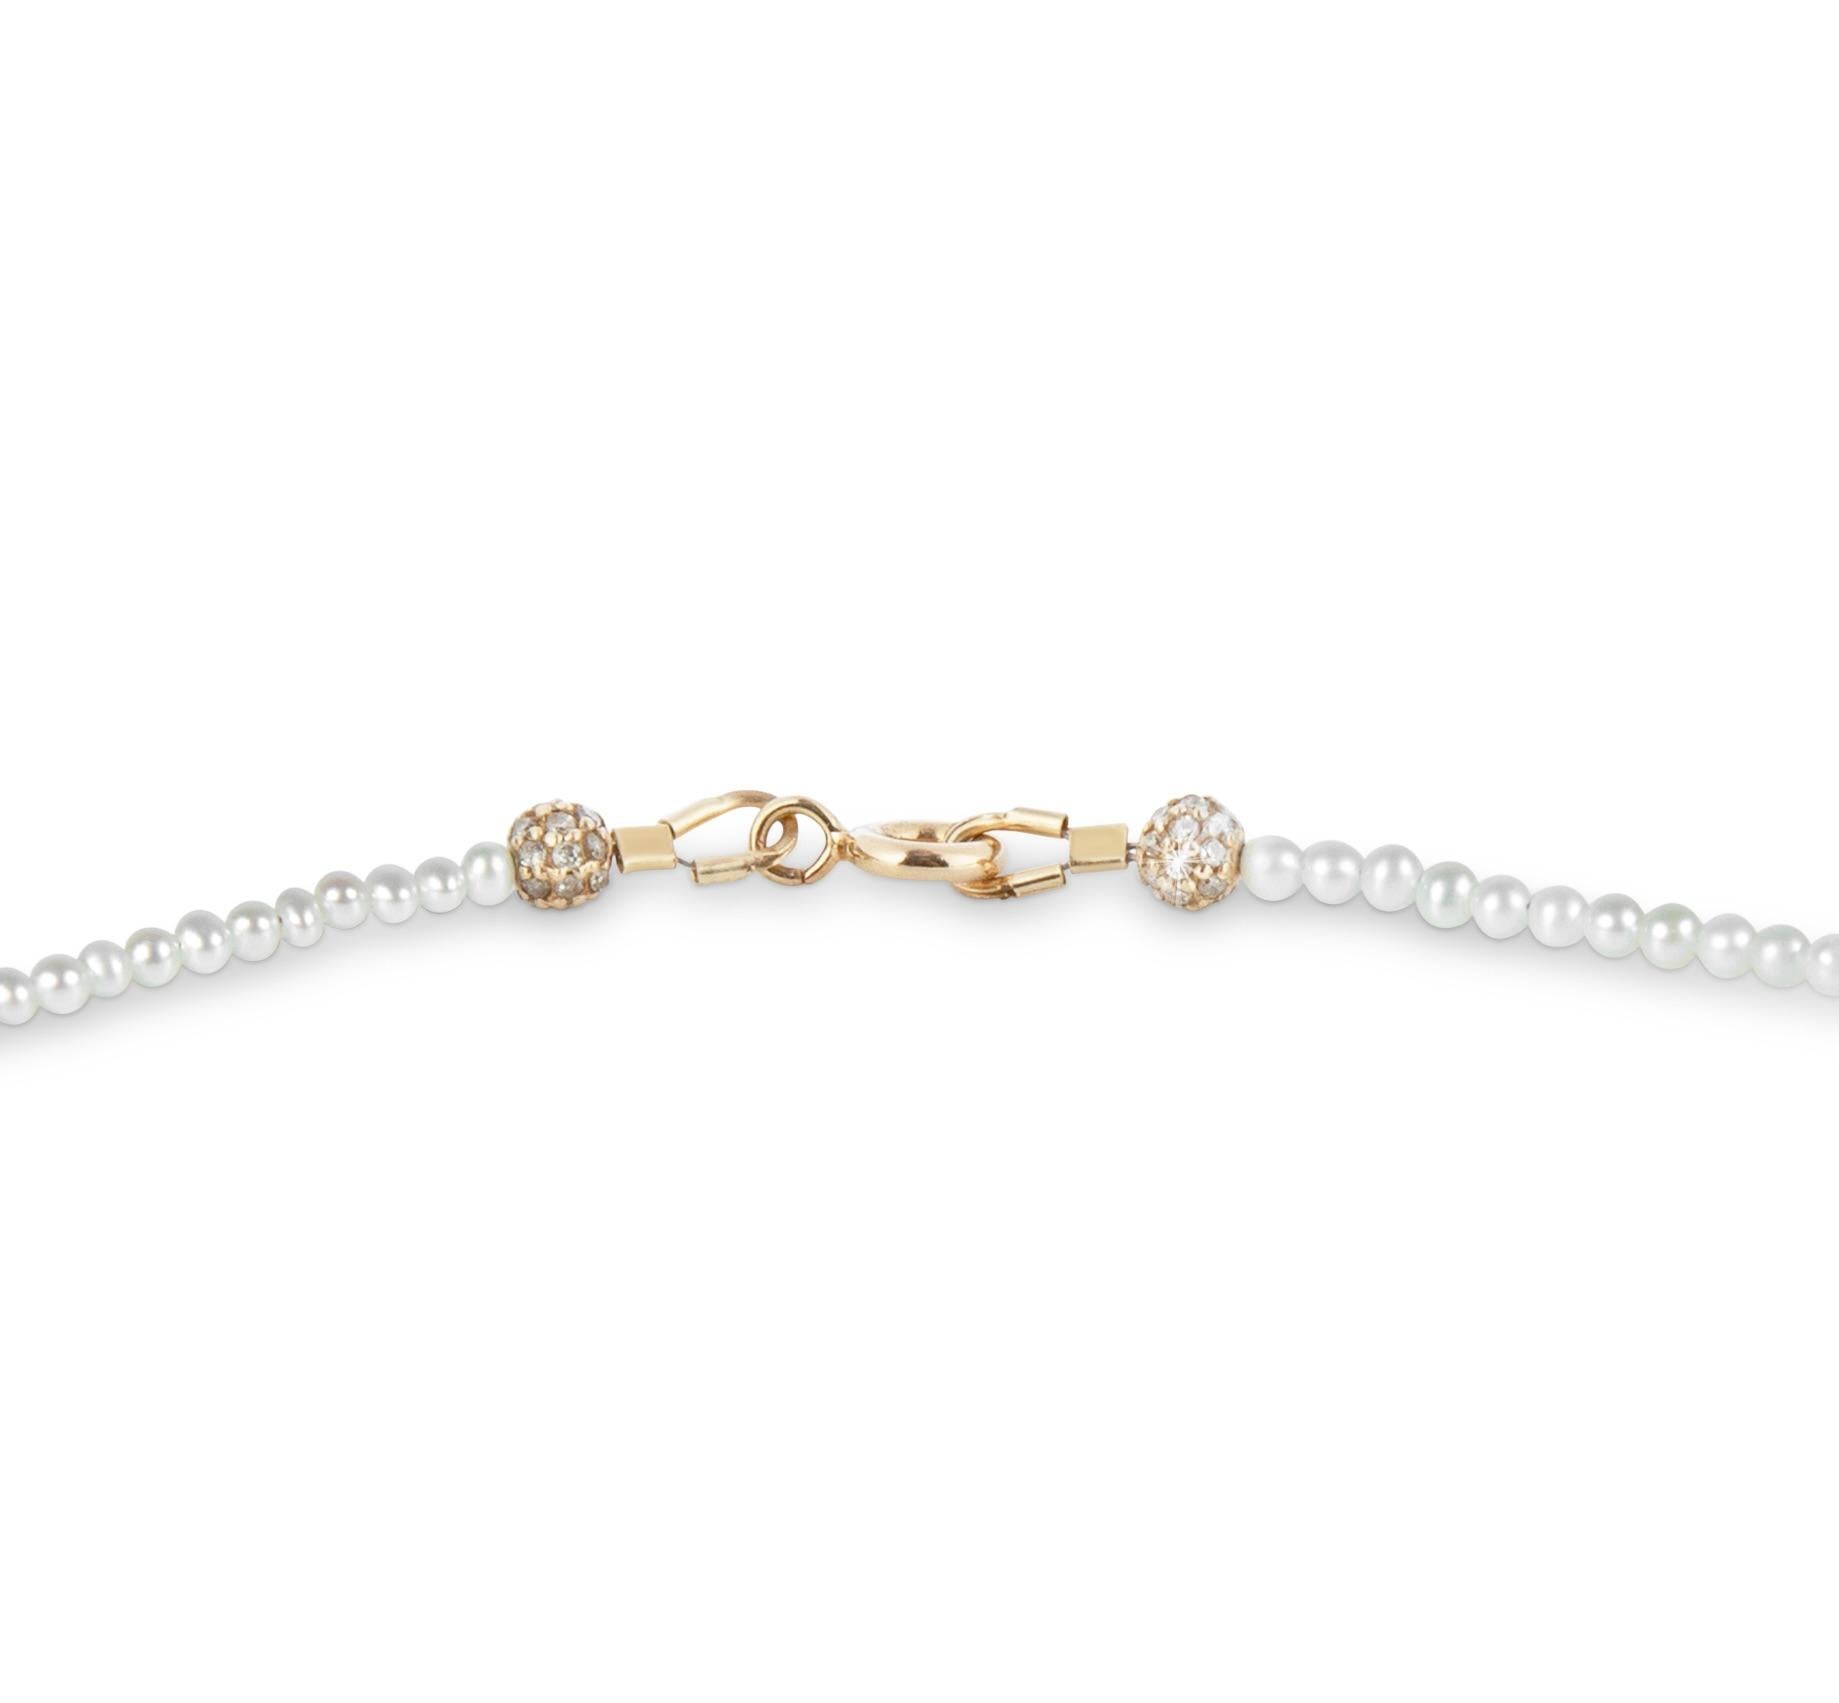 This delicate freshwater pearl necklace is made from AAA+ quality freshwater pearls with a beautiful luster. 
It has a 14K yellow gold clasp and two additional 14k diamond-encrusted beads for extra glamour. 
The necklace can be worn either way. With